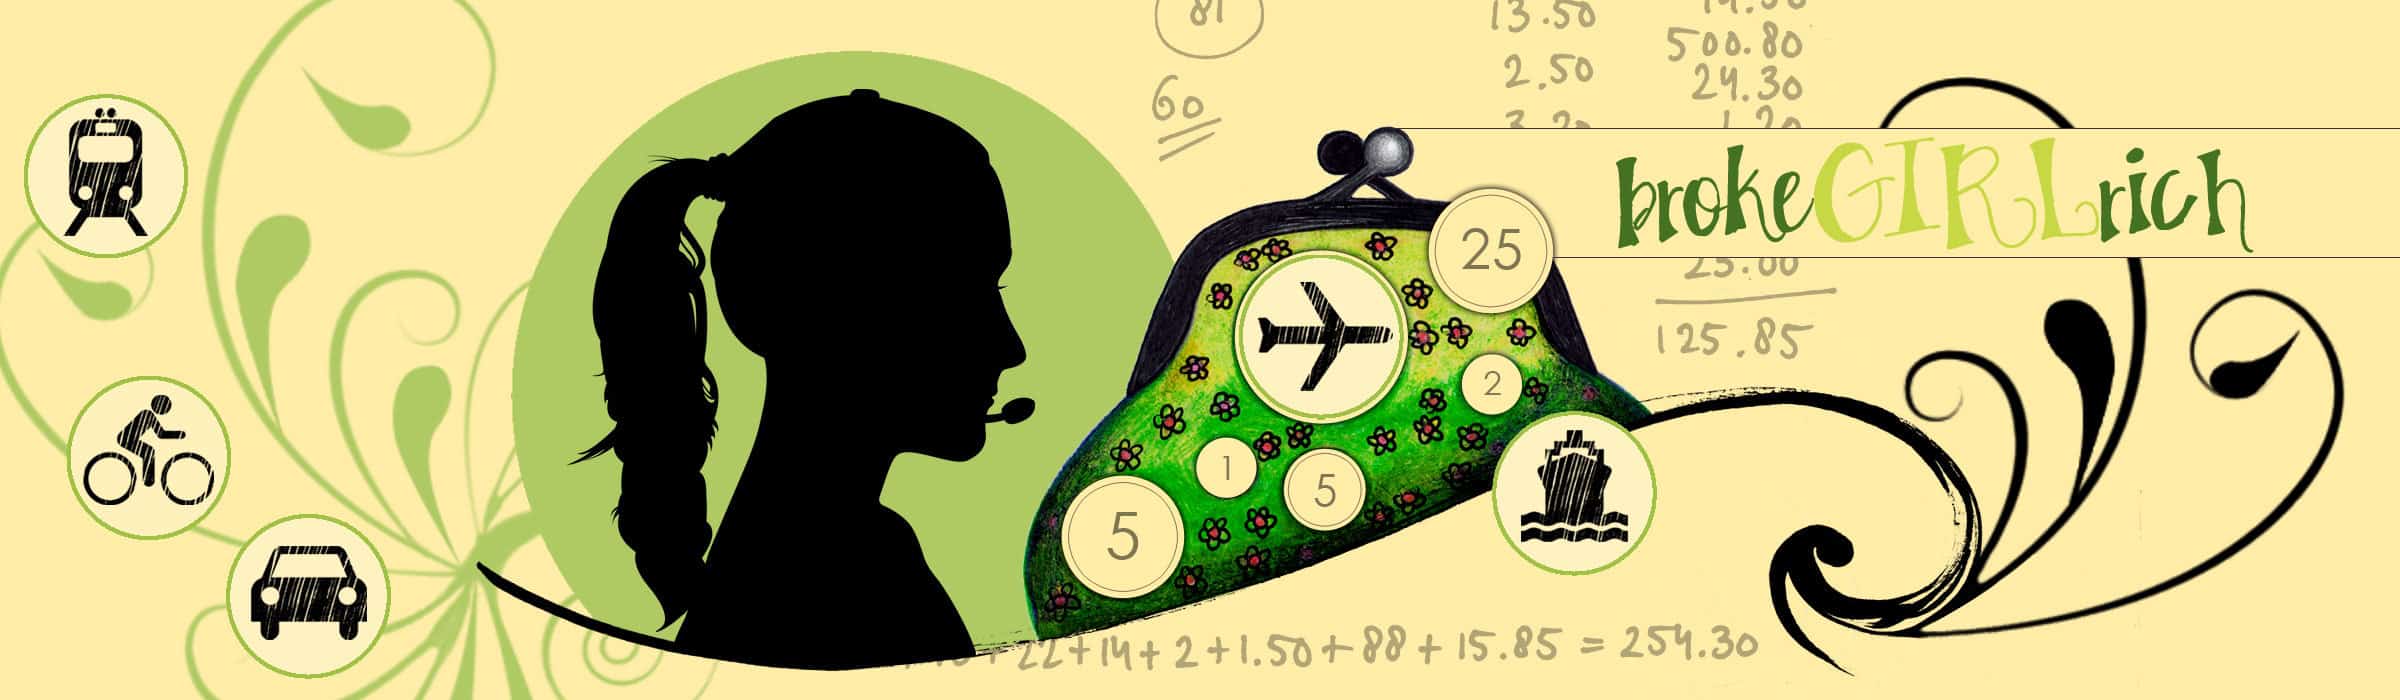 A whimsically designed graphic with a silhouette of a woman's profile set against a green background filled with swirls, mathematical equations, and various icons such as a purse, bicycle, and cake, all surrounding a central image of an ornate, vintage-style purse with a clock face, evoking a sense of timelessness and the complexities of daily life.